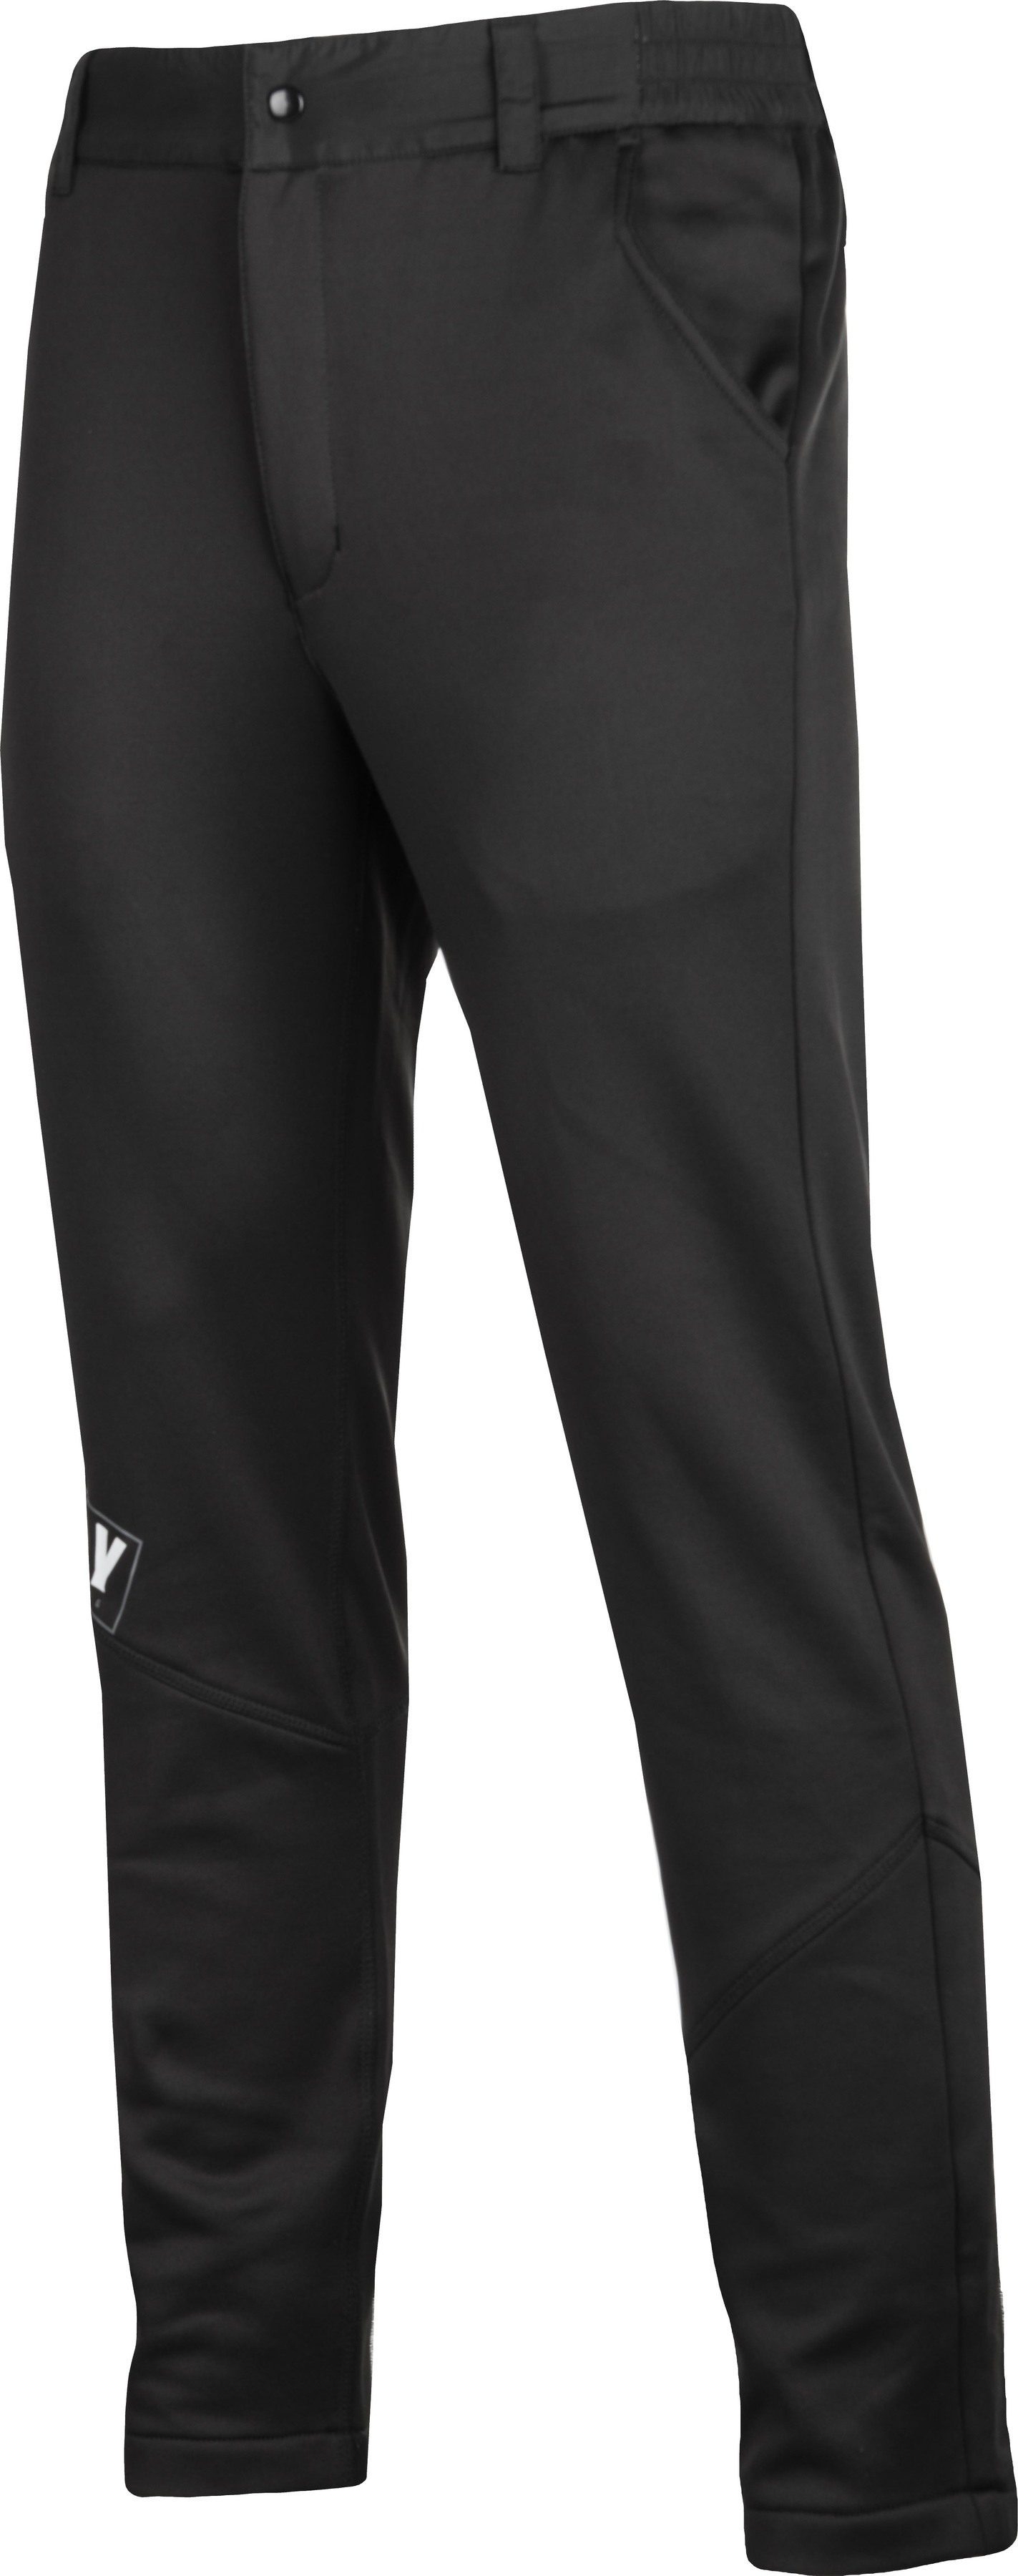 Mid-Layer Pants Black Small - Click Image to Close